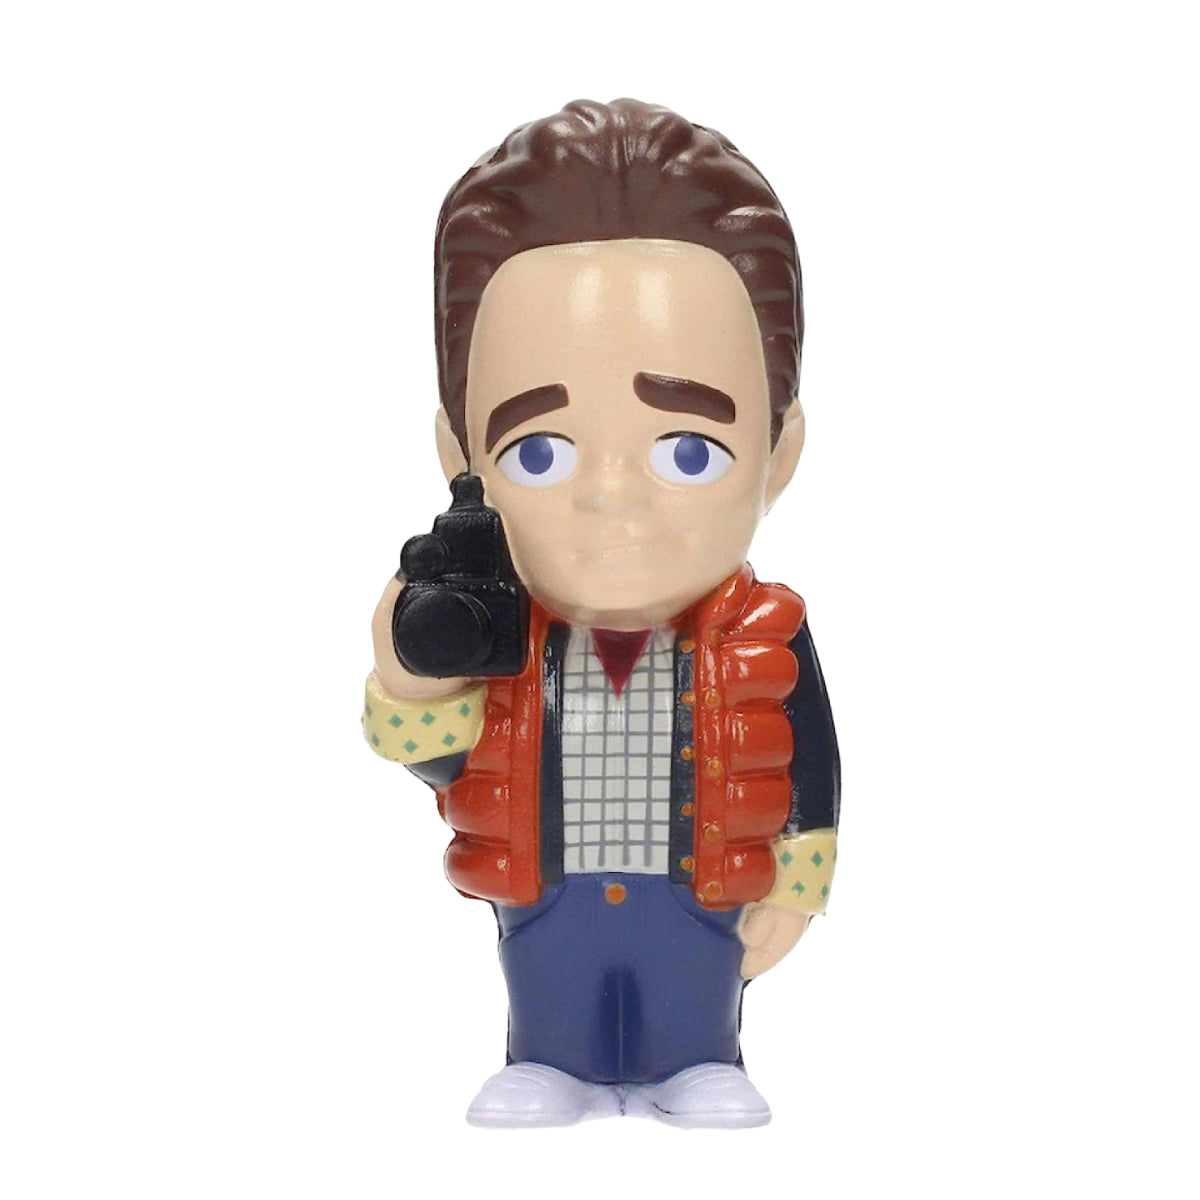 SD TOYS BACK TO THE FUTURE MARTY MCFLY STRESS DOLL